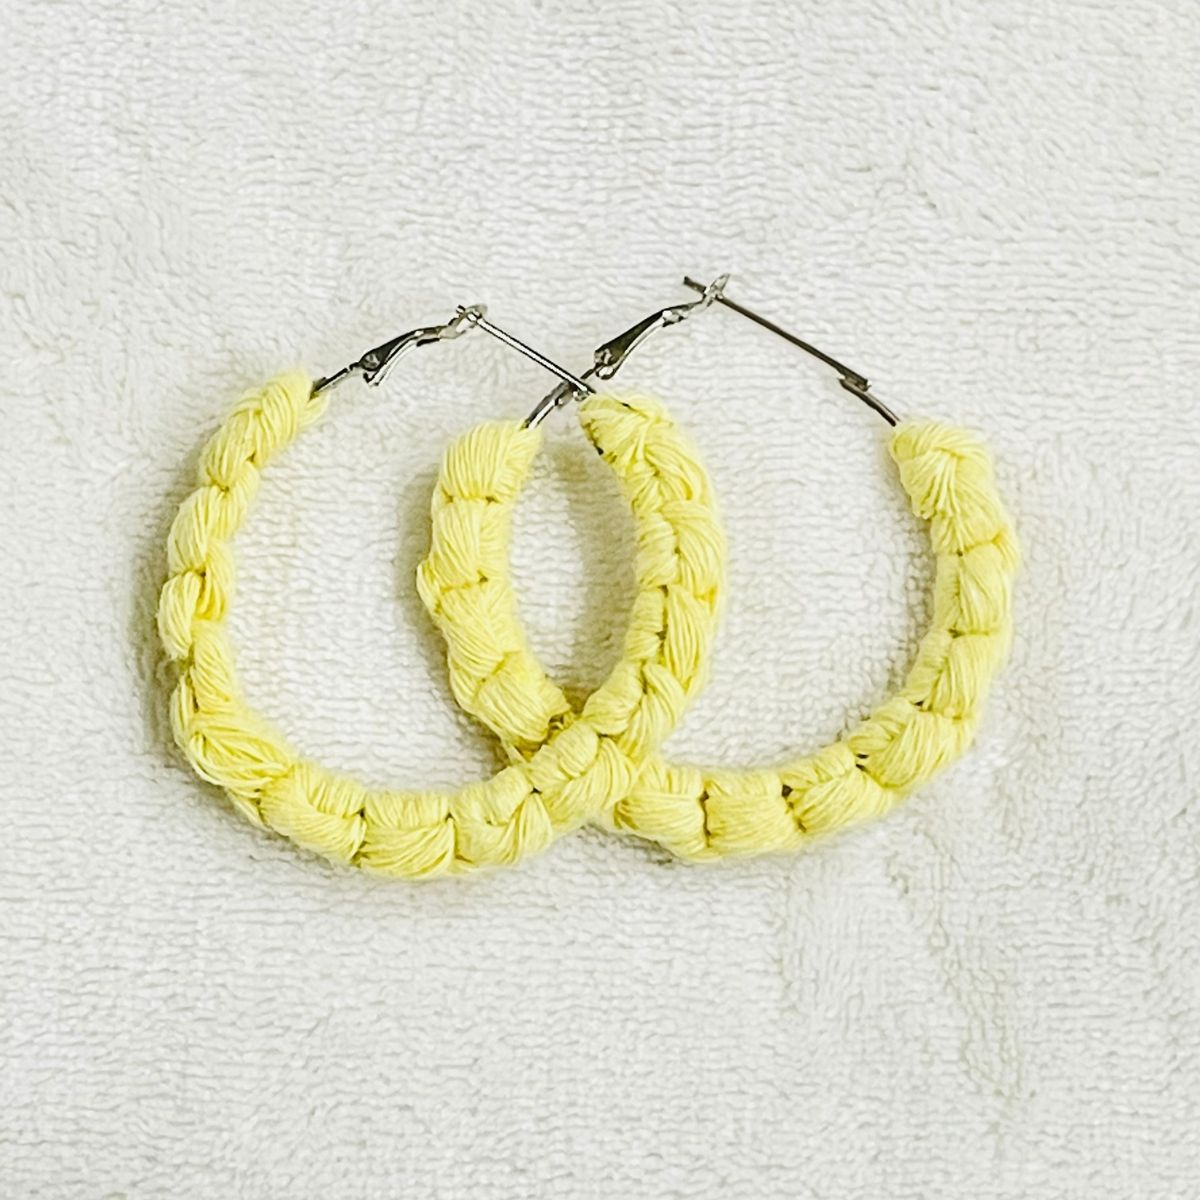 Yellow Macrame hoop earrings online india wholesale handmade gifts for her valentine's day birthday bridesmaid mothers day gift affordable gifts under 350 online